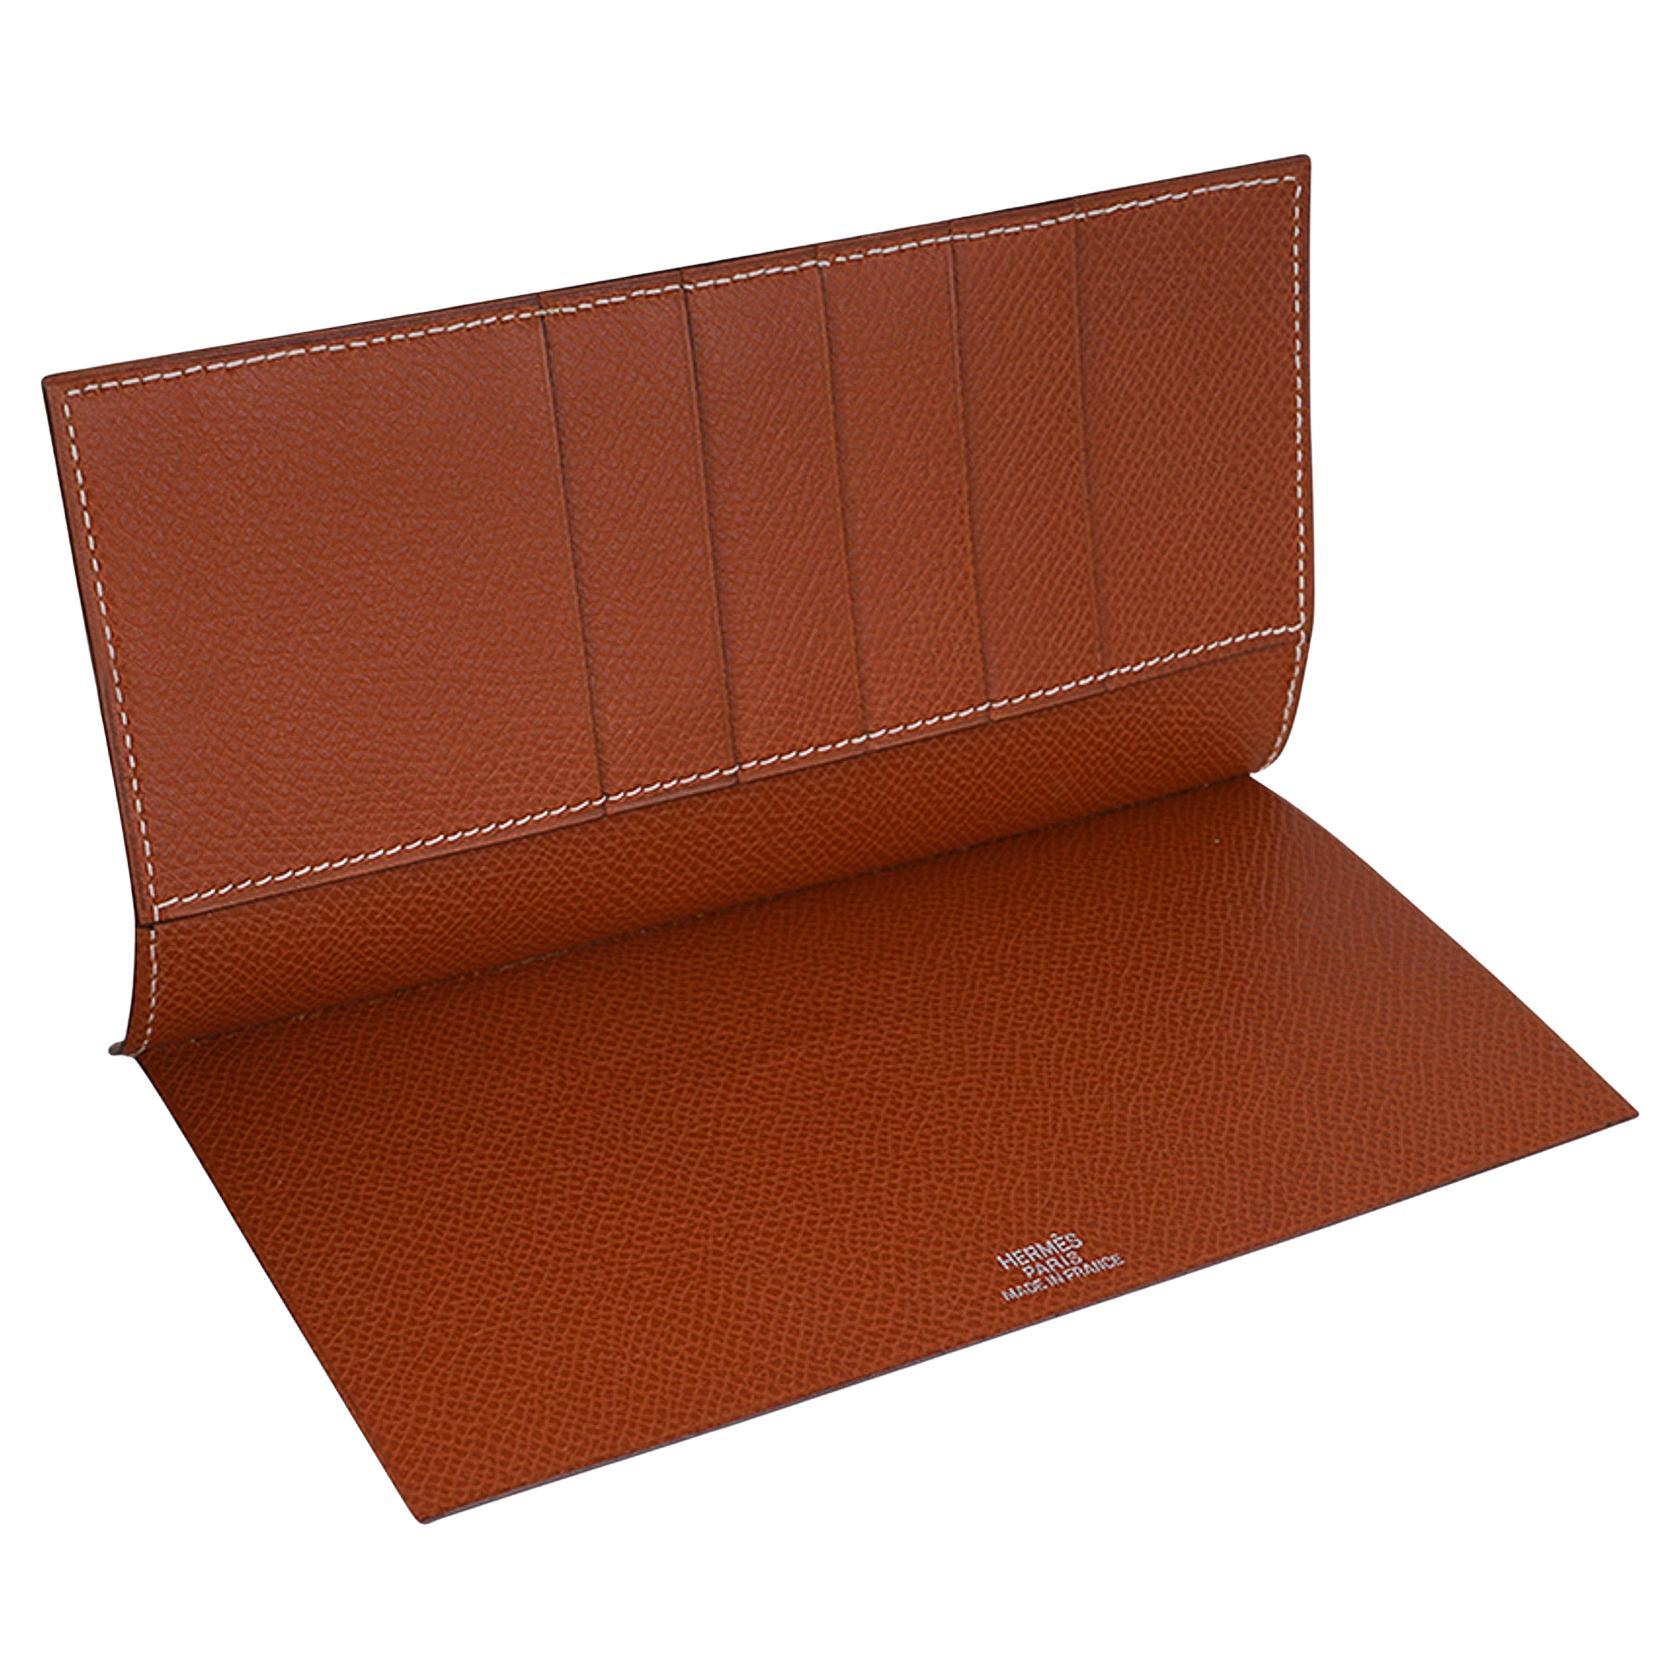 Mightychic offers an Hermes Vintage Card Case / Bill Fold featured in Gold Epsom leather.
The card holder has 4 slots for business/credit cards and 2 pockets.
Comes with signature Hermes box.
New or Store Fresh Condition.
final sale

CARD HOLDER